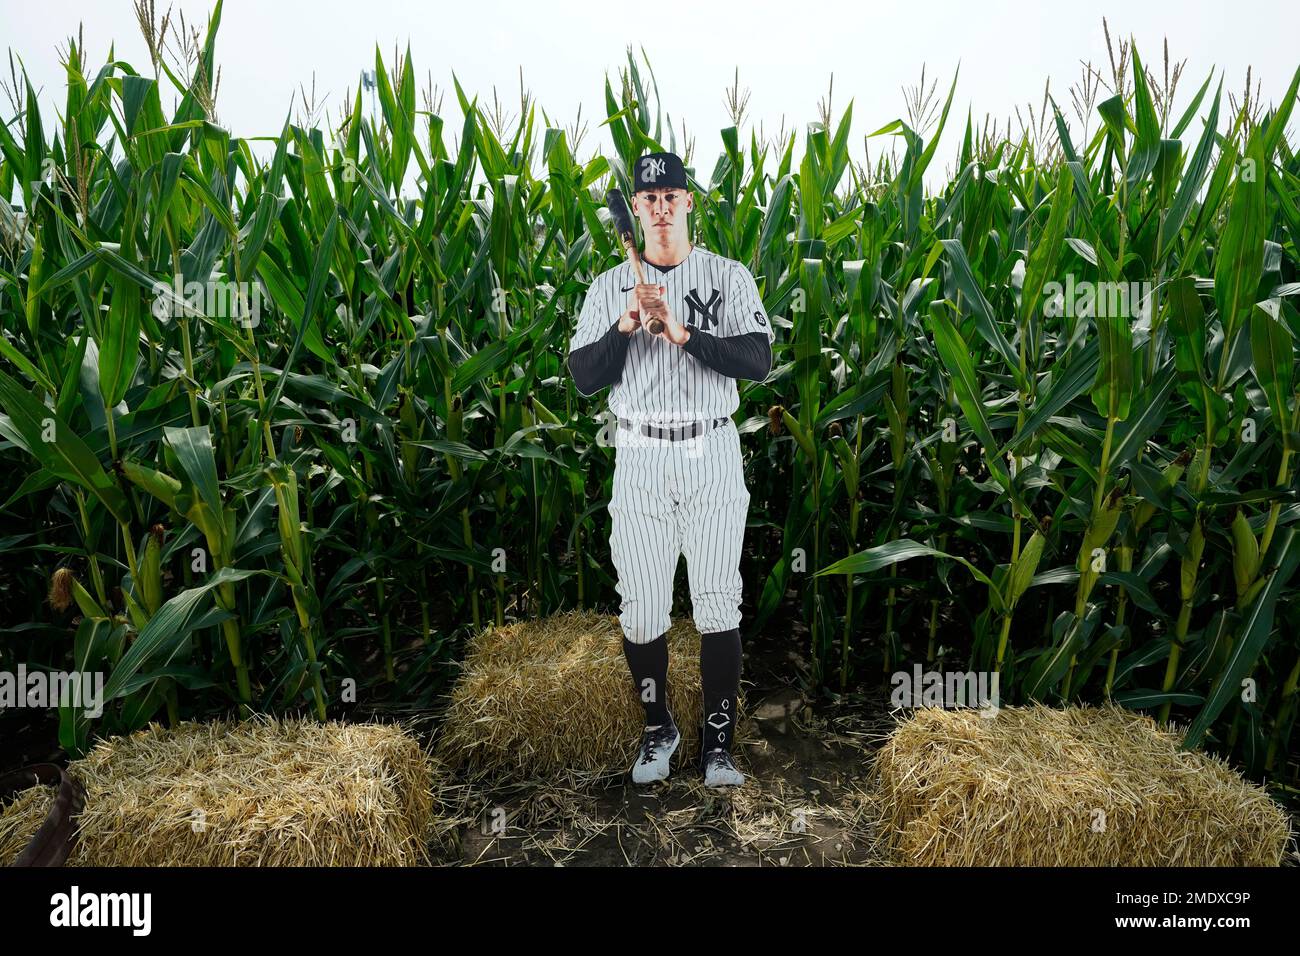 A cutout of New York Yankees right fielder Aaron Judge stands in a